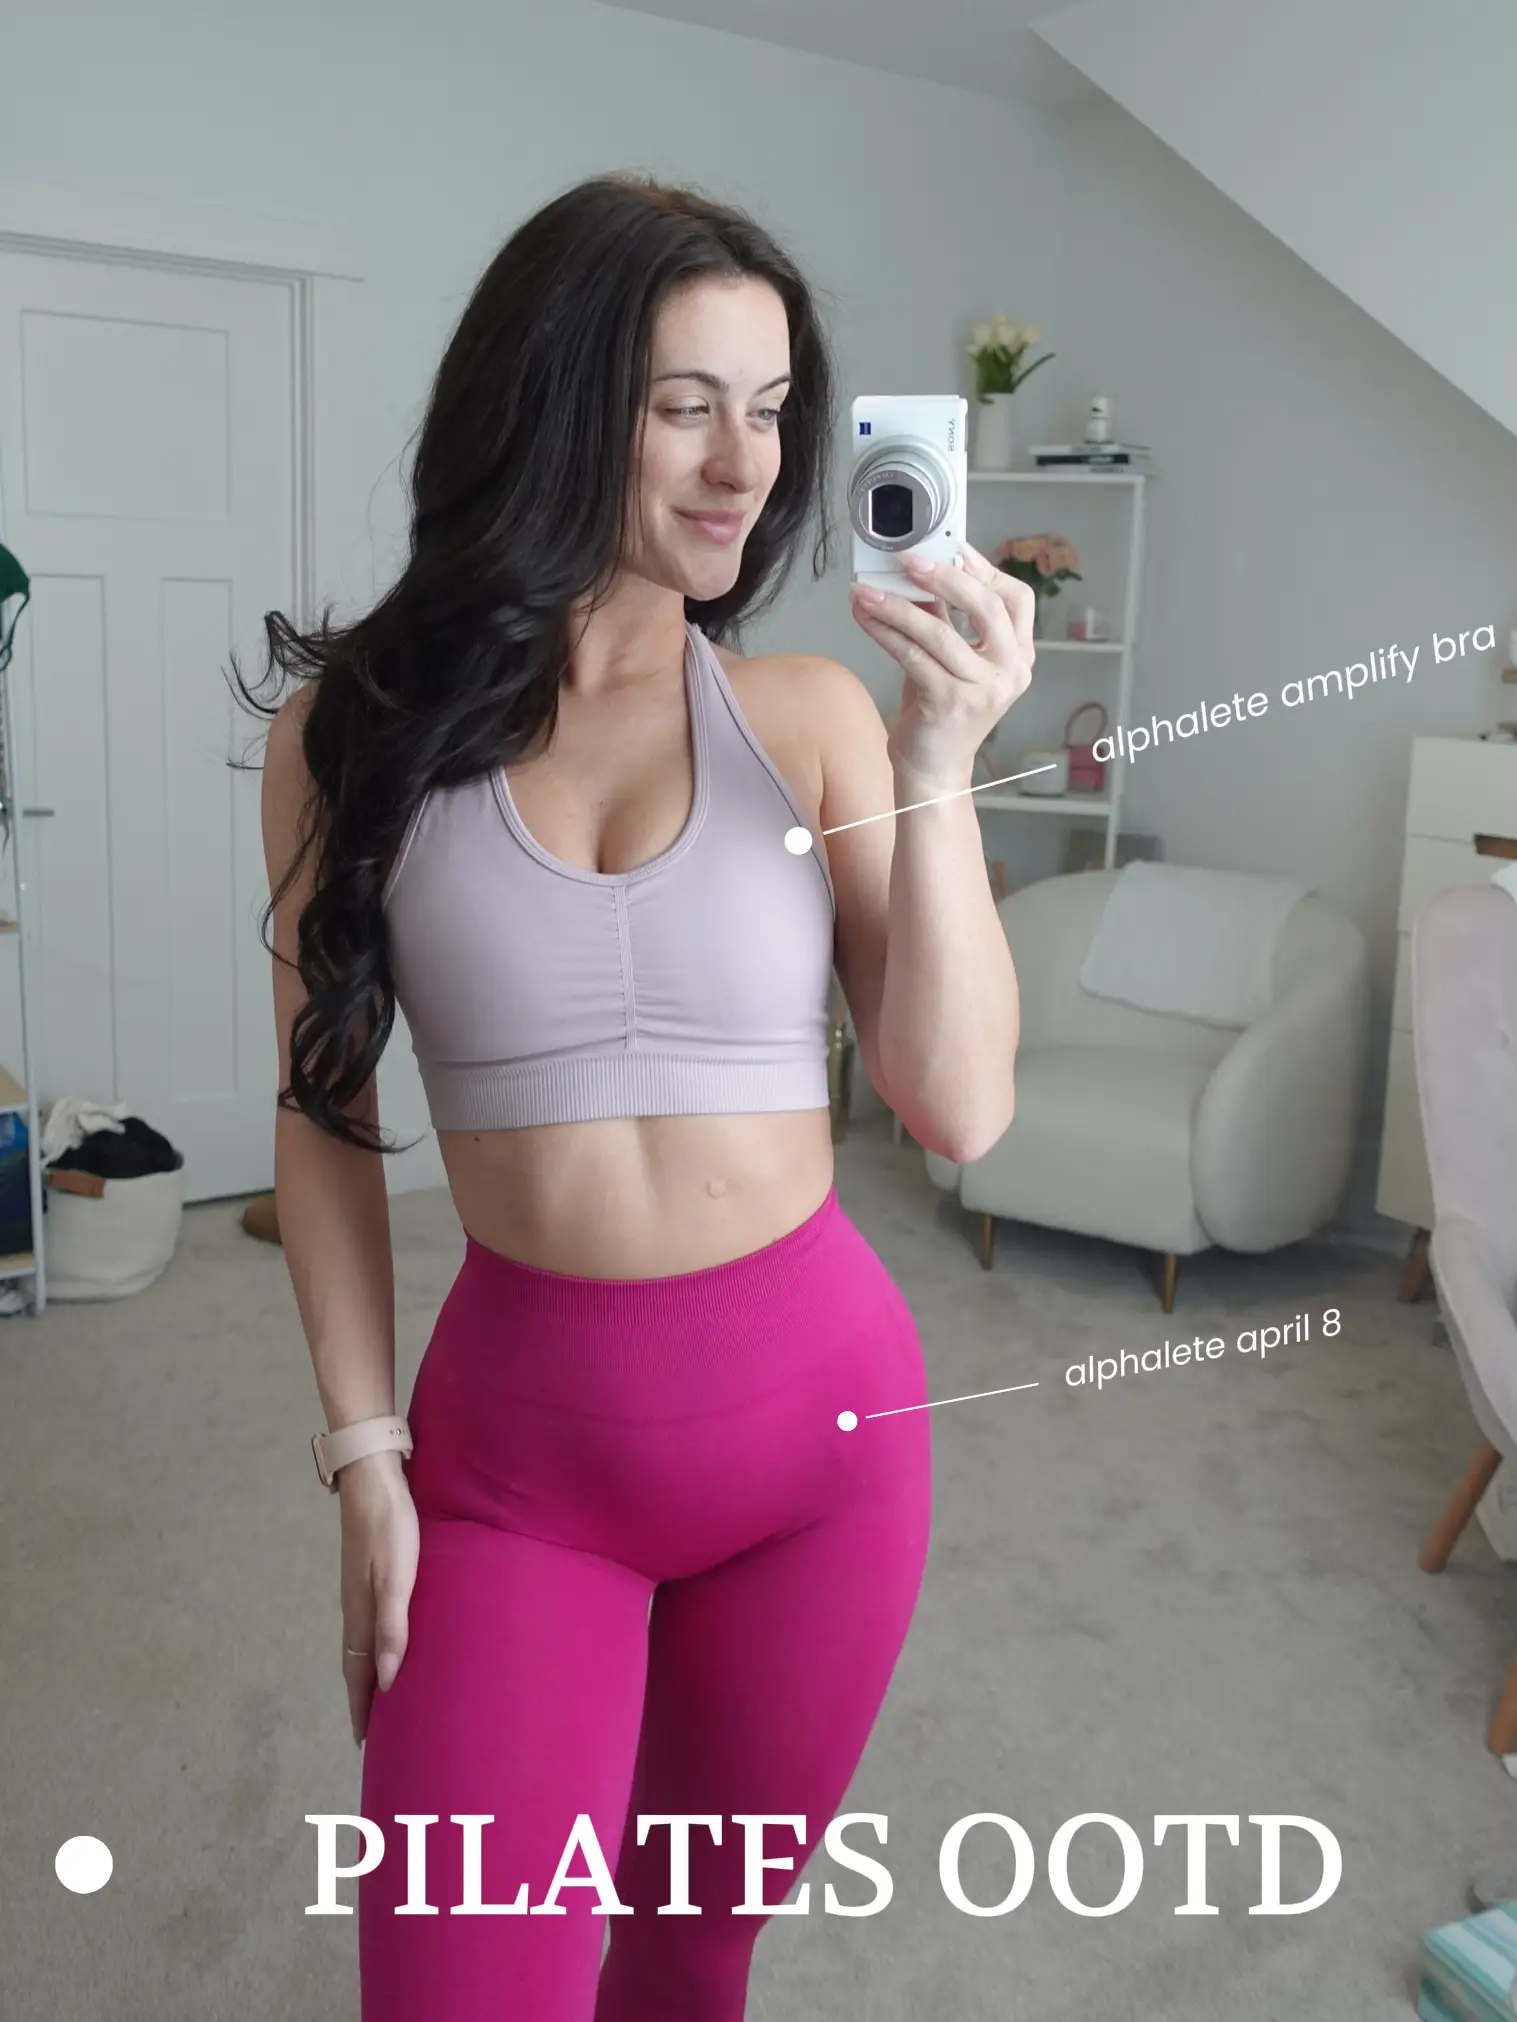 Alphalete owners - do the leggings actually make your butt look